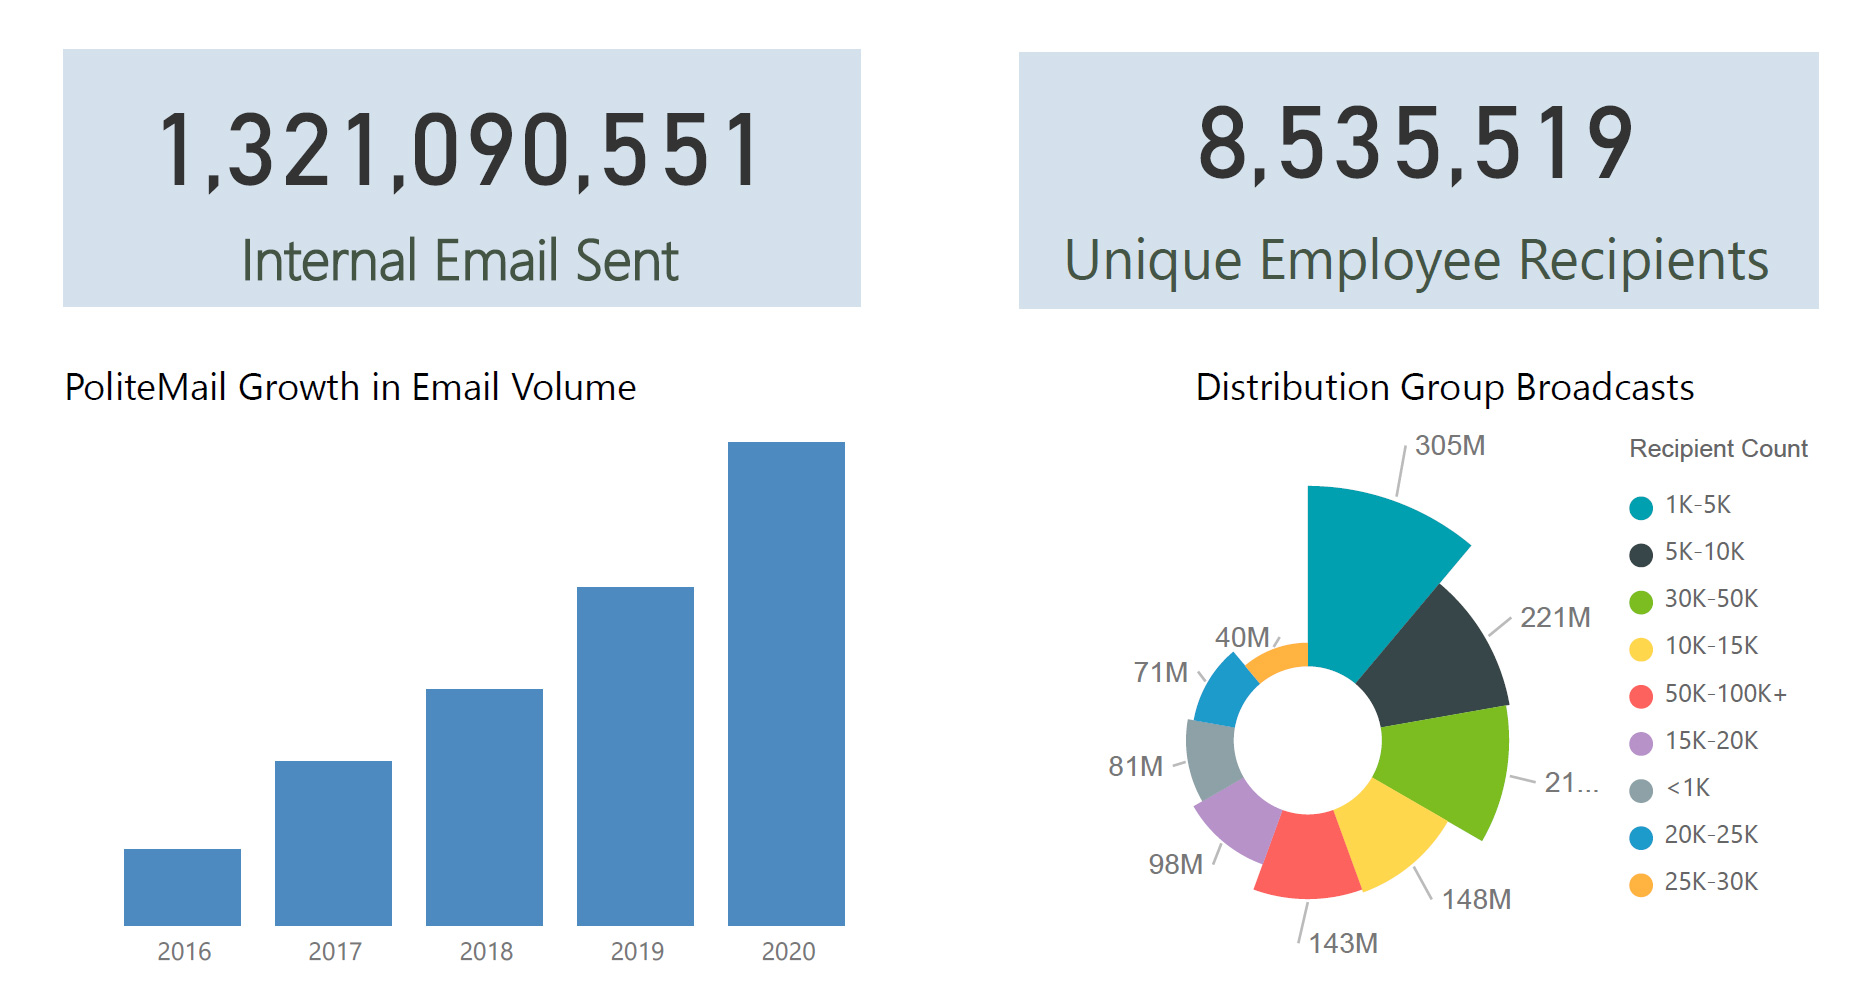 Data showing 1.3 billion emails sent to 8.5 million employees